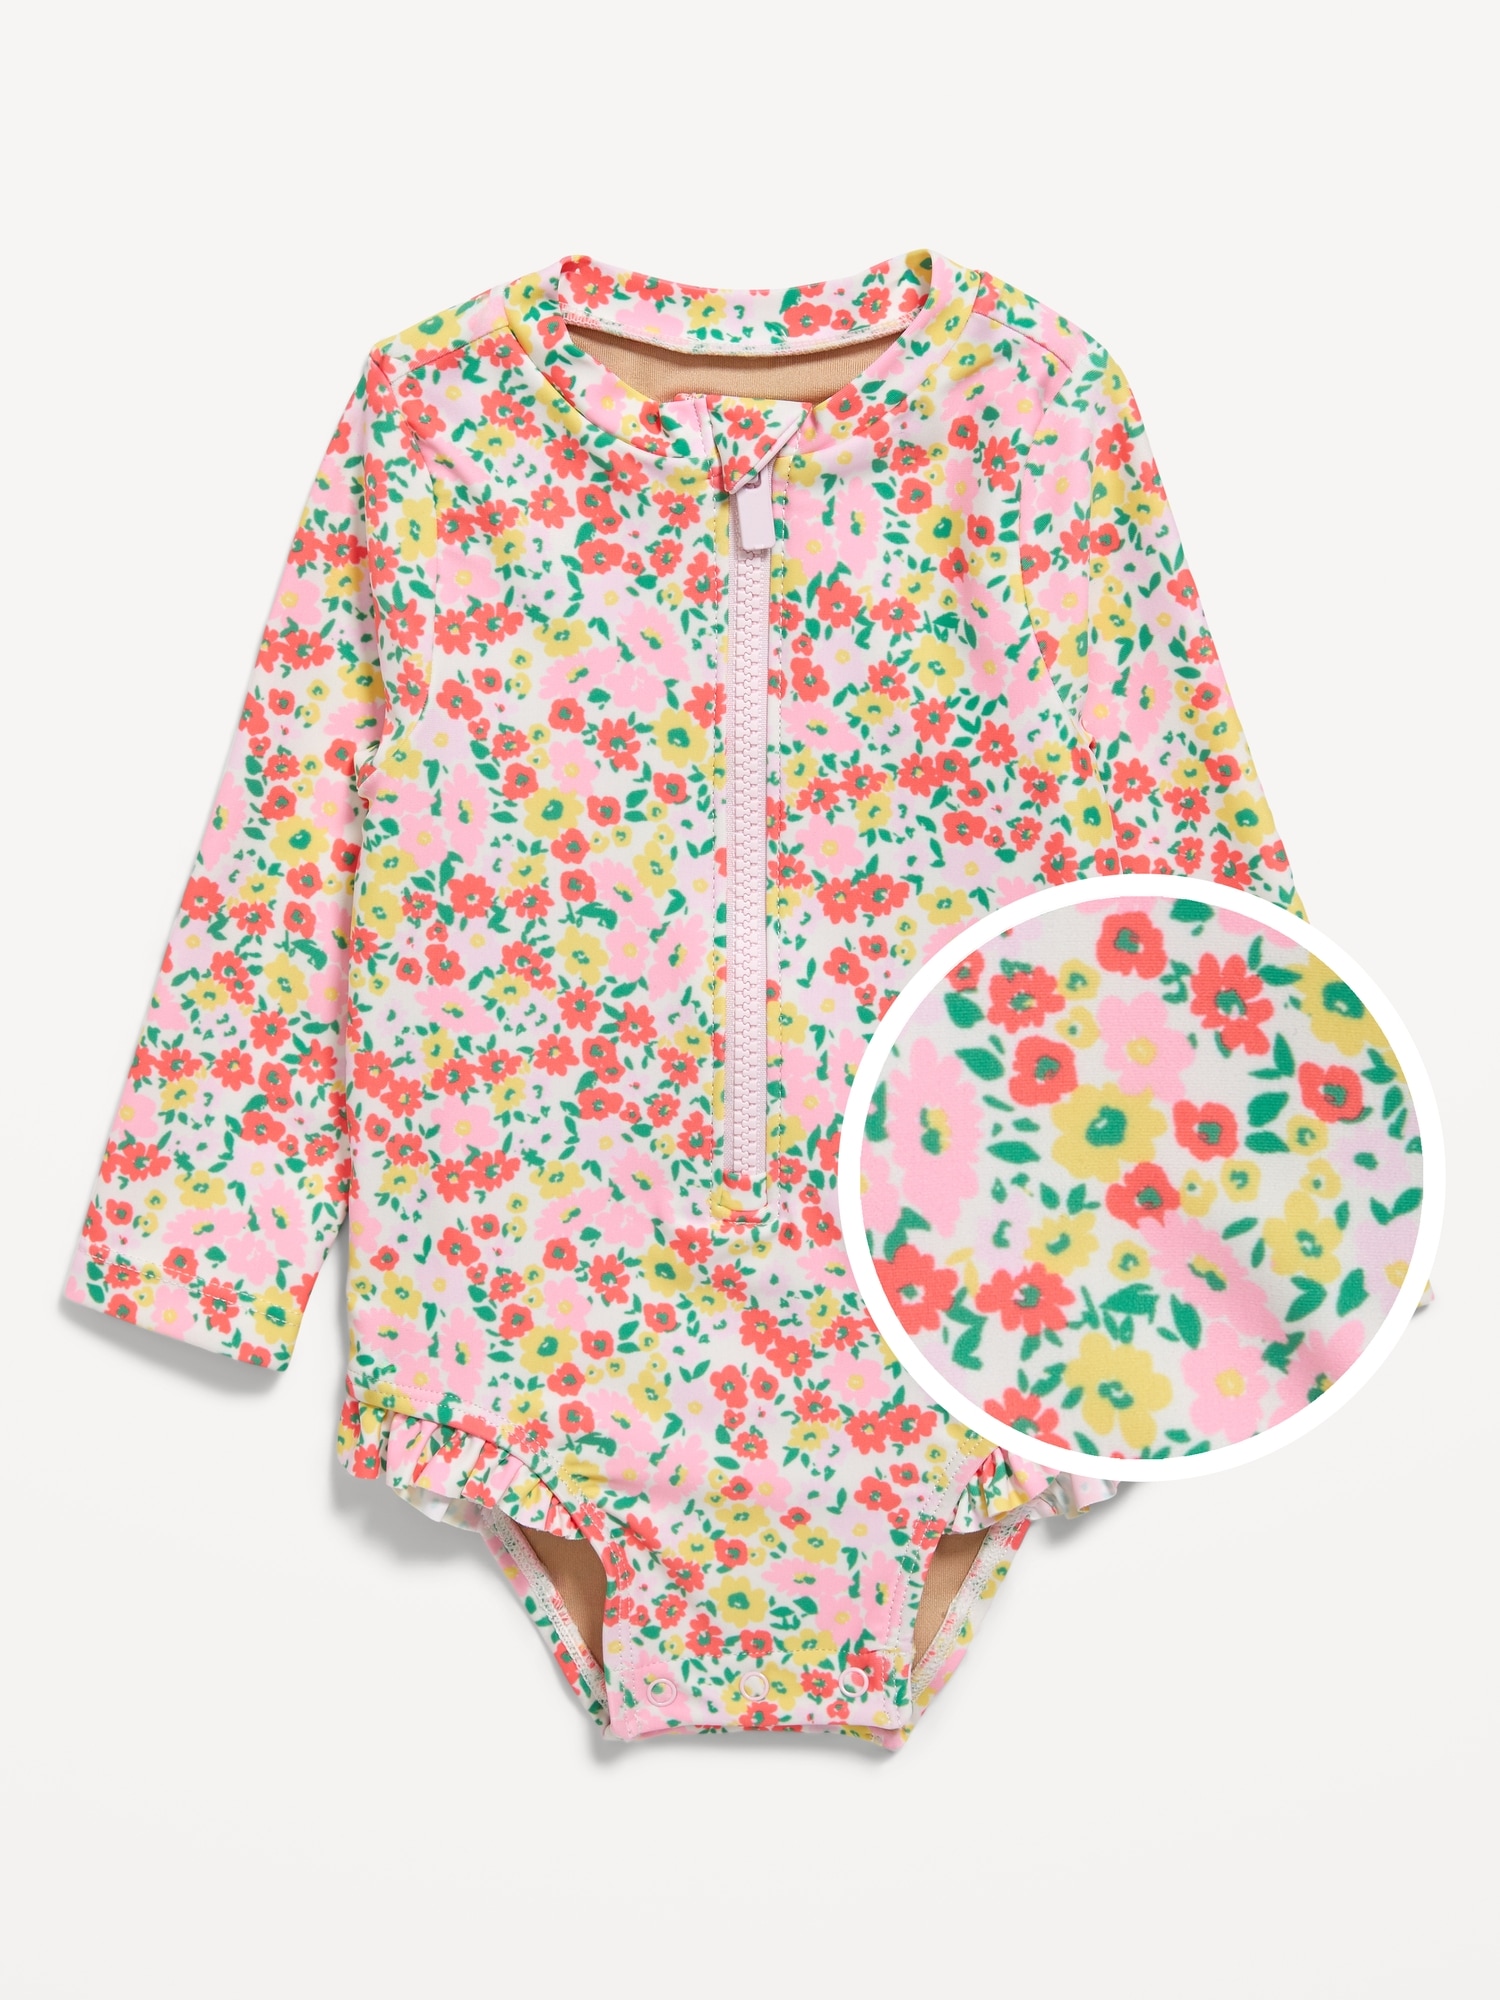 Printed Ruffle-Trim Rashguard One-Piece Swimsuit for Baby | Old Navy